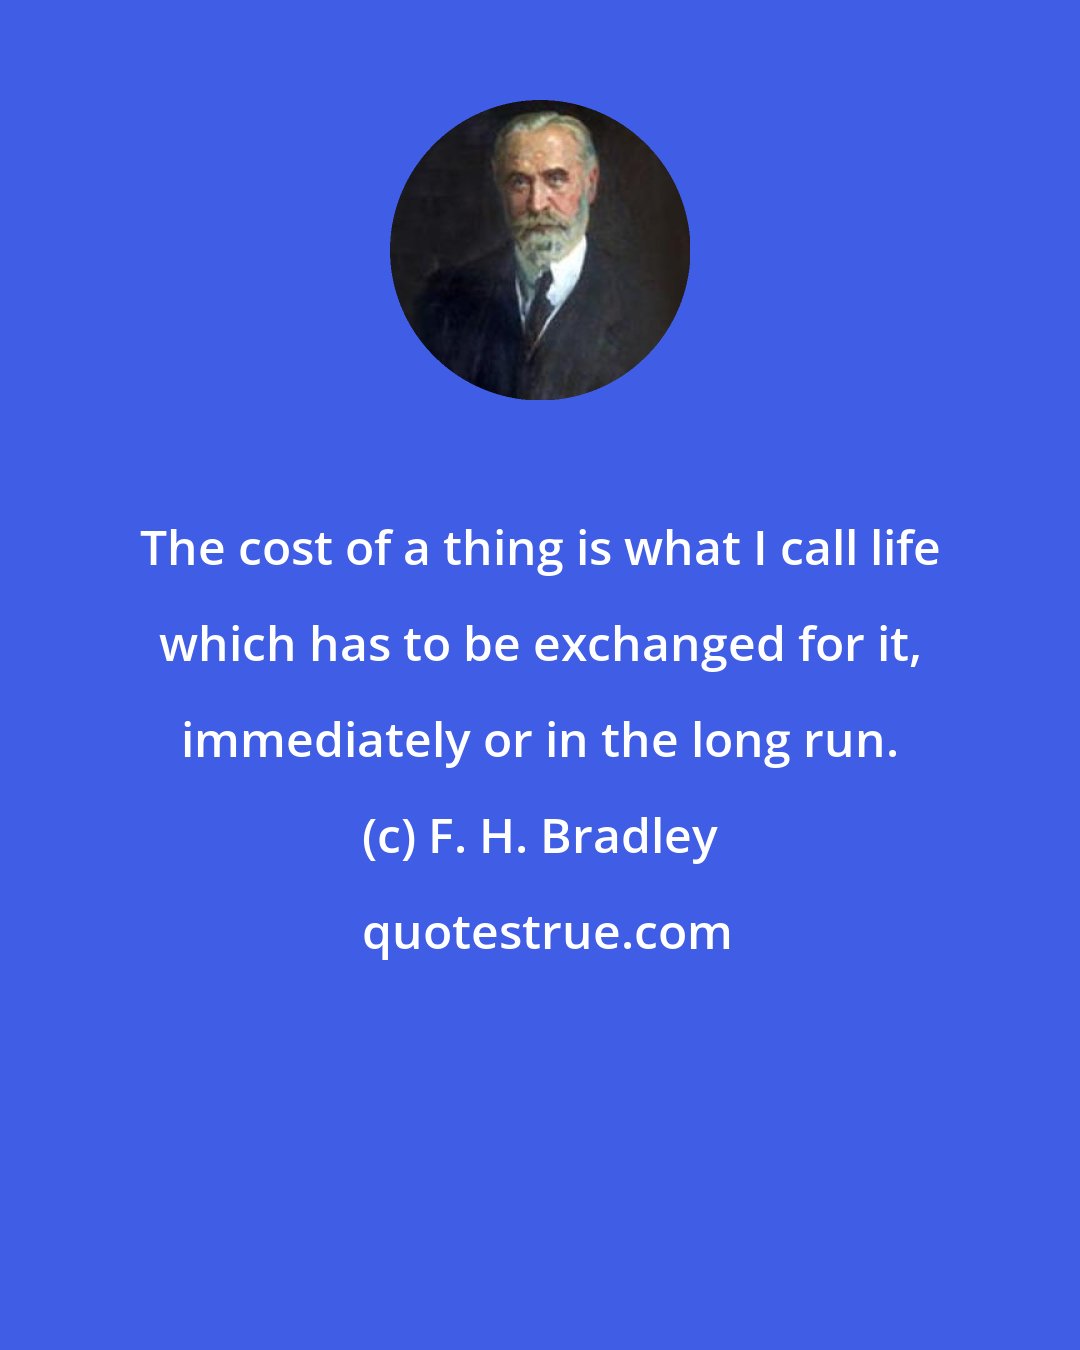 F. H. Bradley: The cost of a thing is what I call life which has to be exchanged for it, immediately or in the long run.